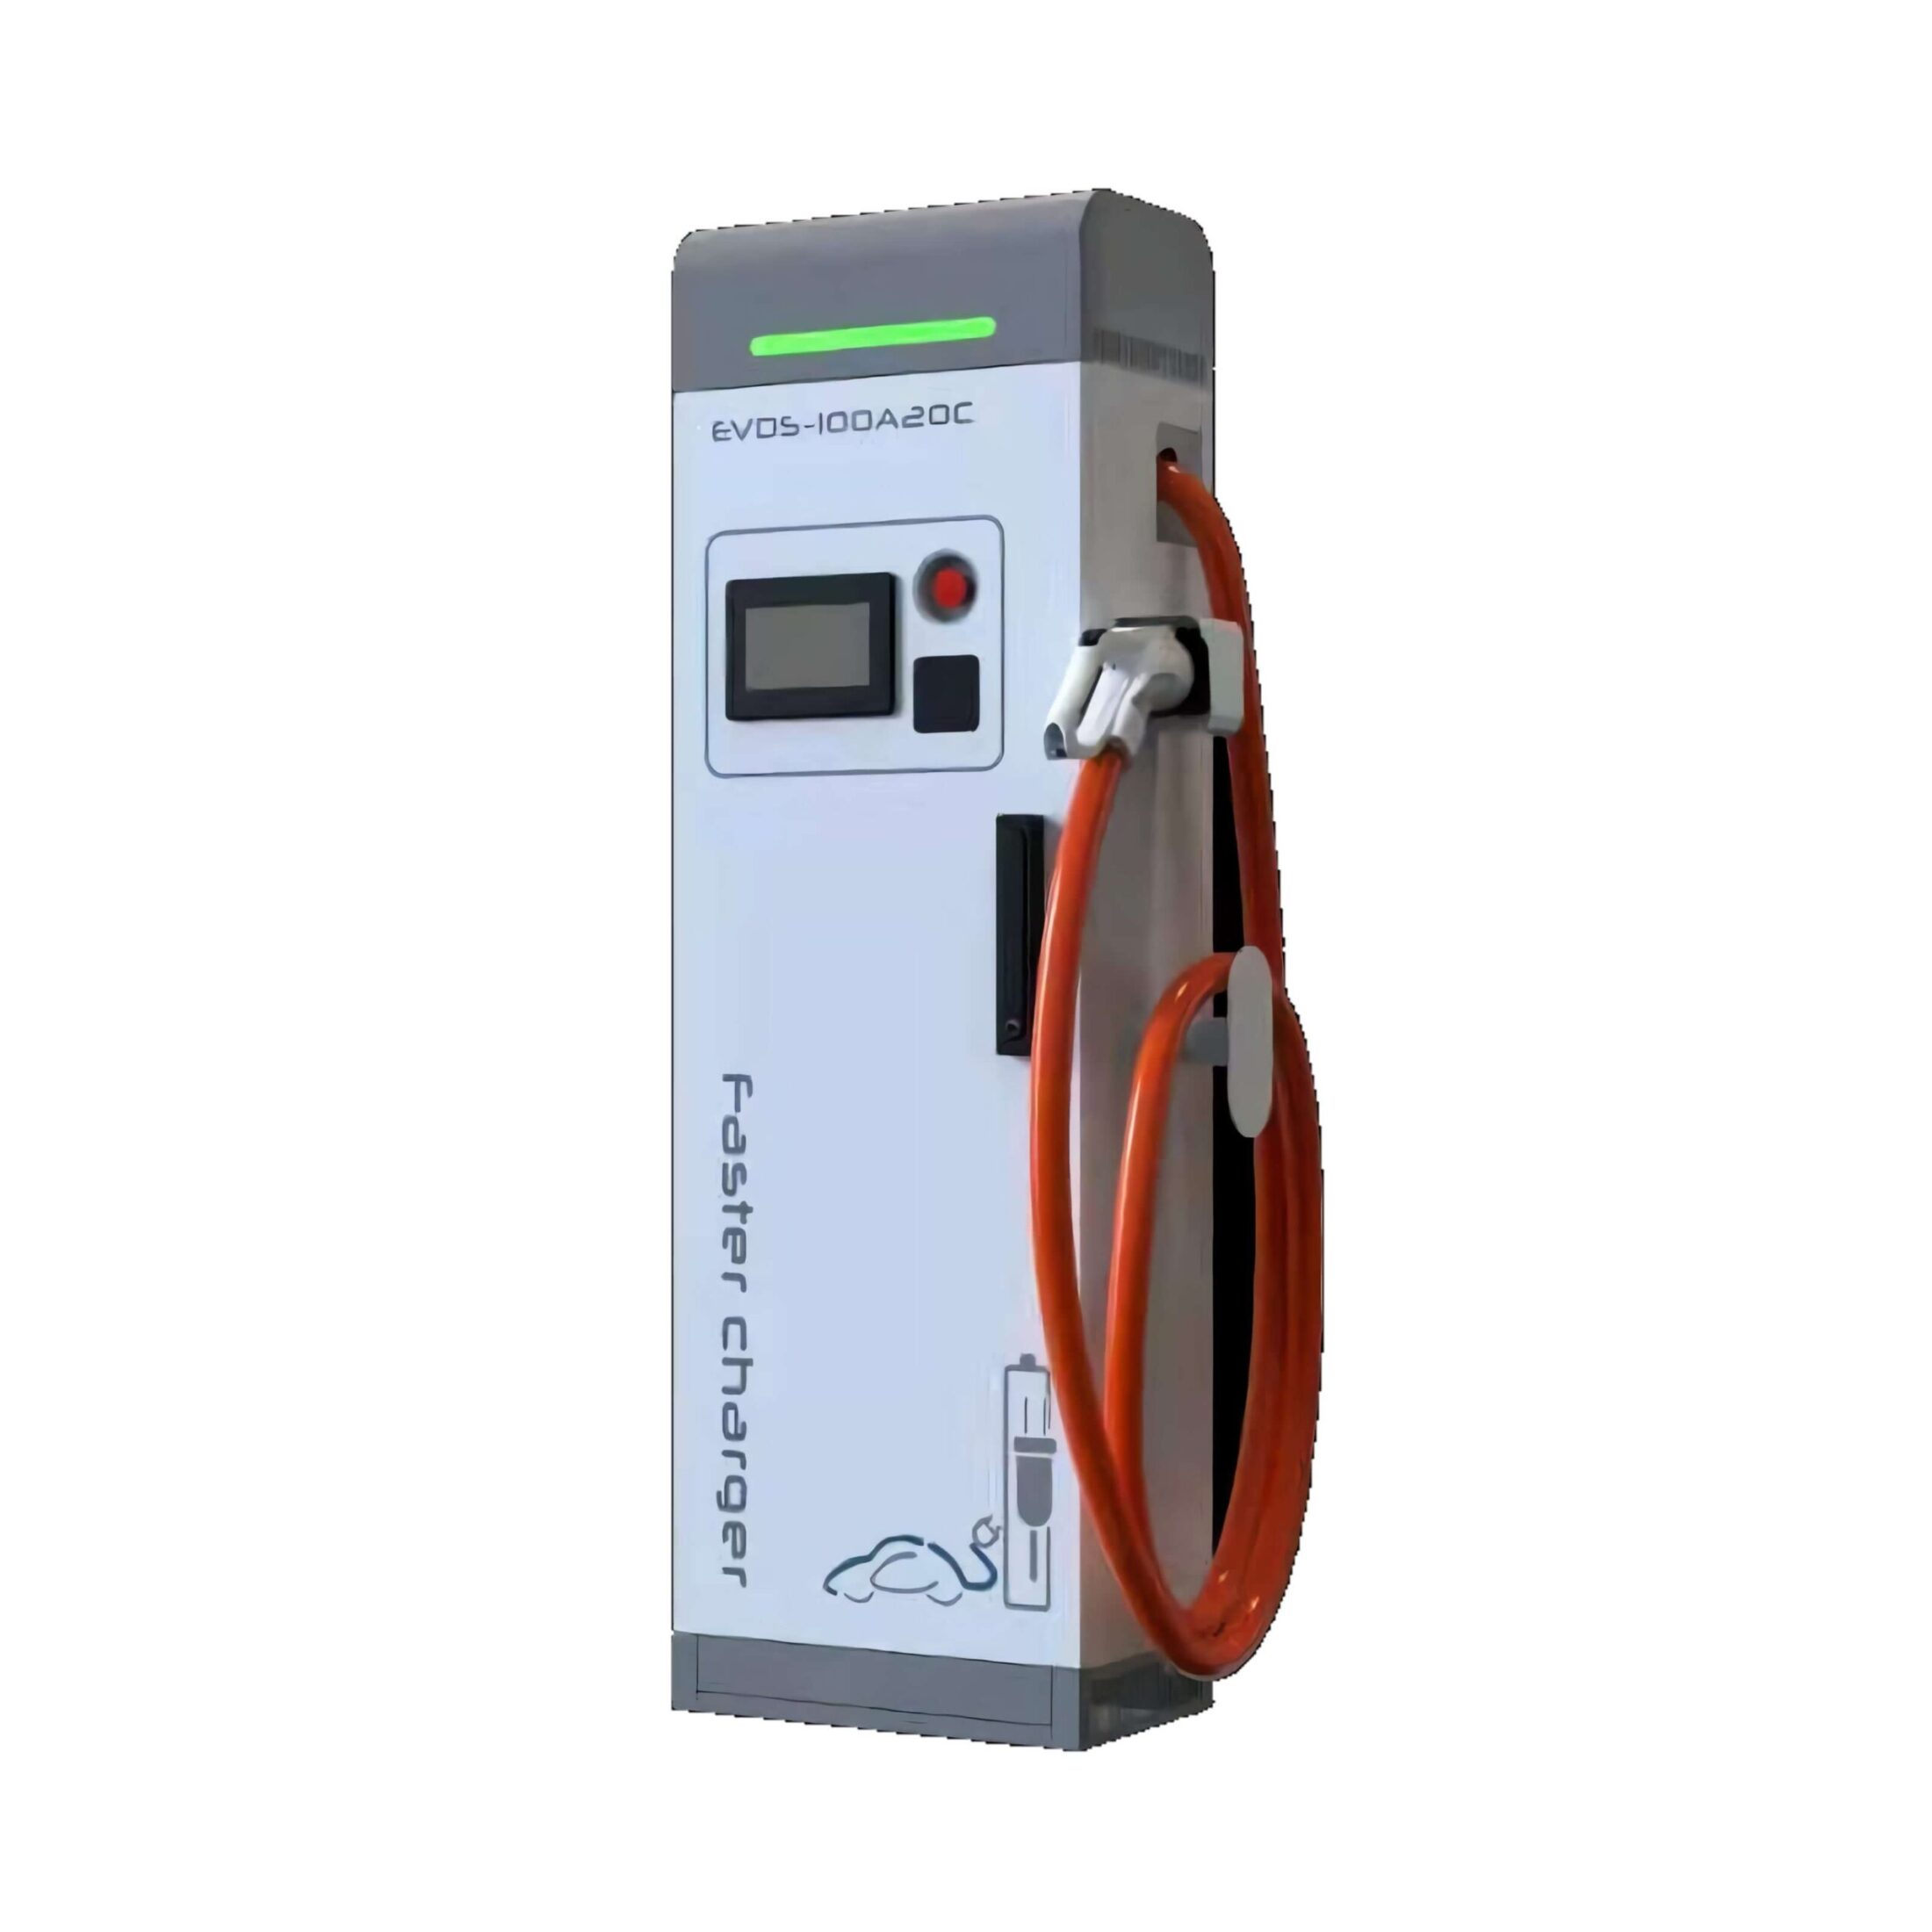 https://e-vehicleinfo.com/tirex-ev-charging-solution-company-in-india/